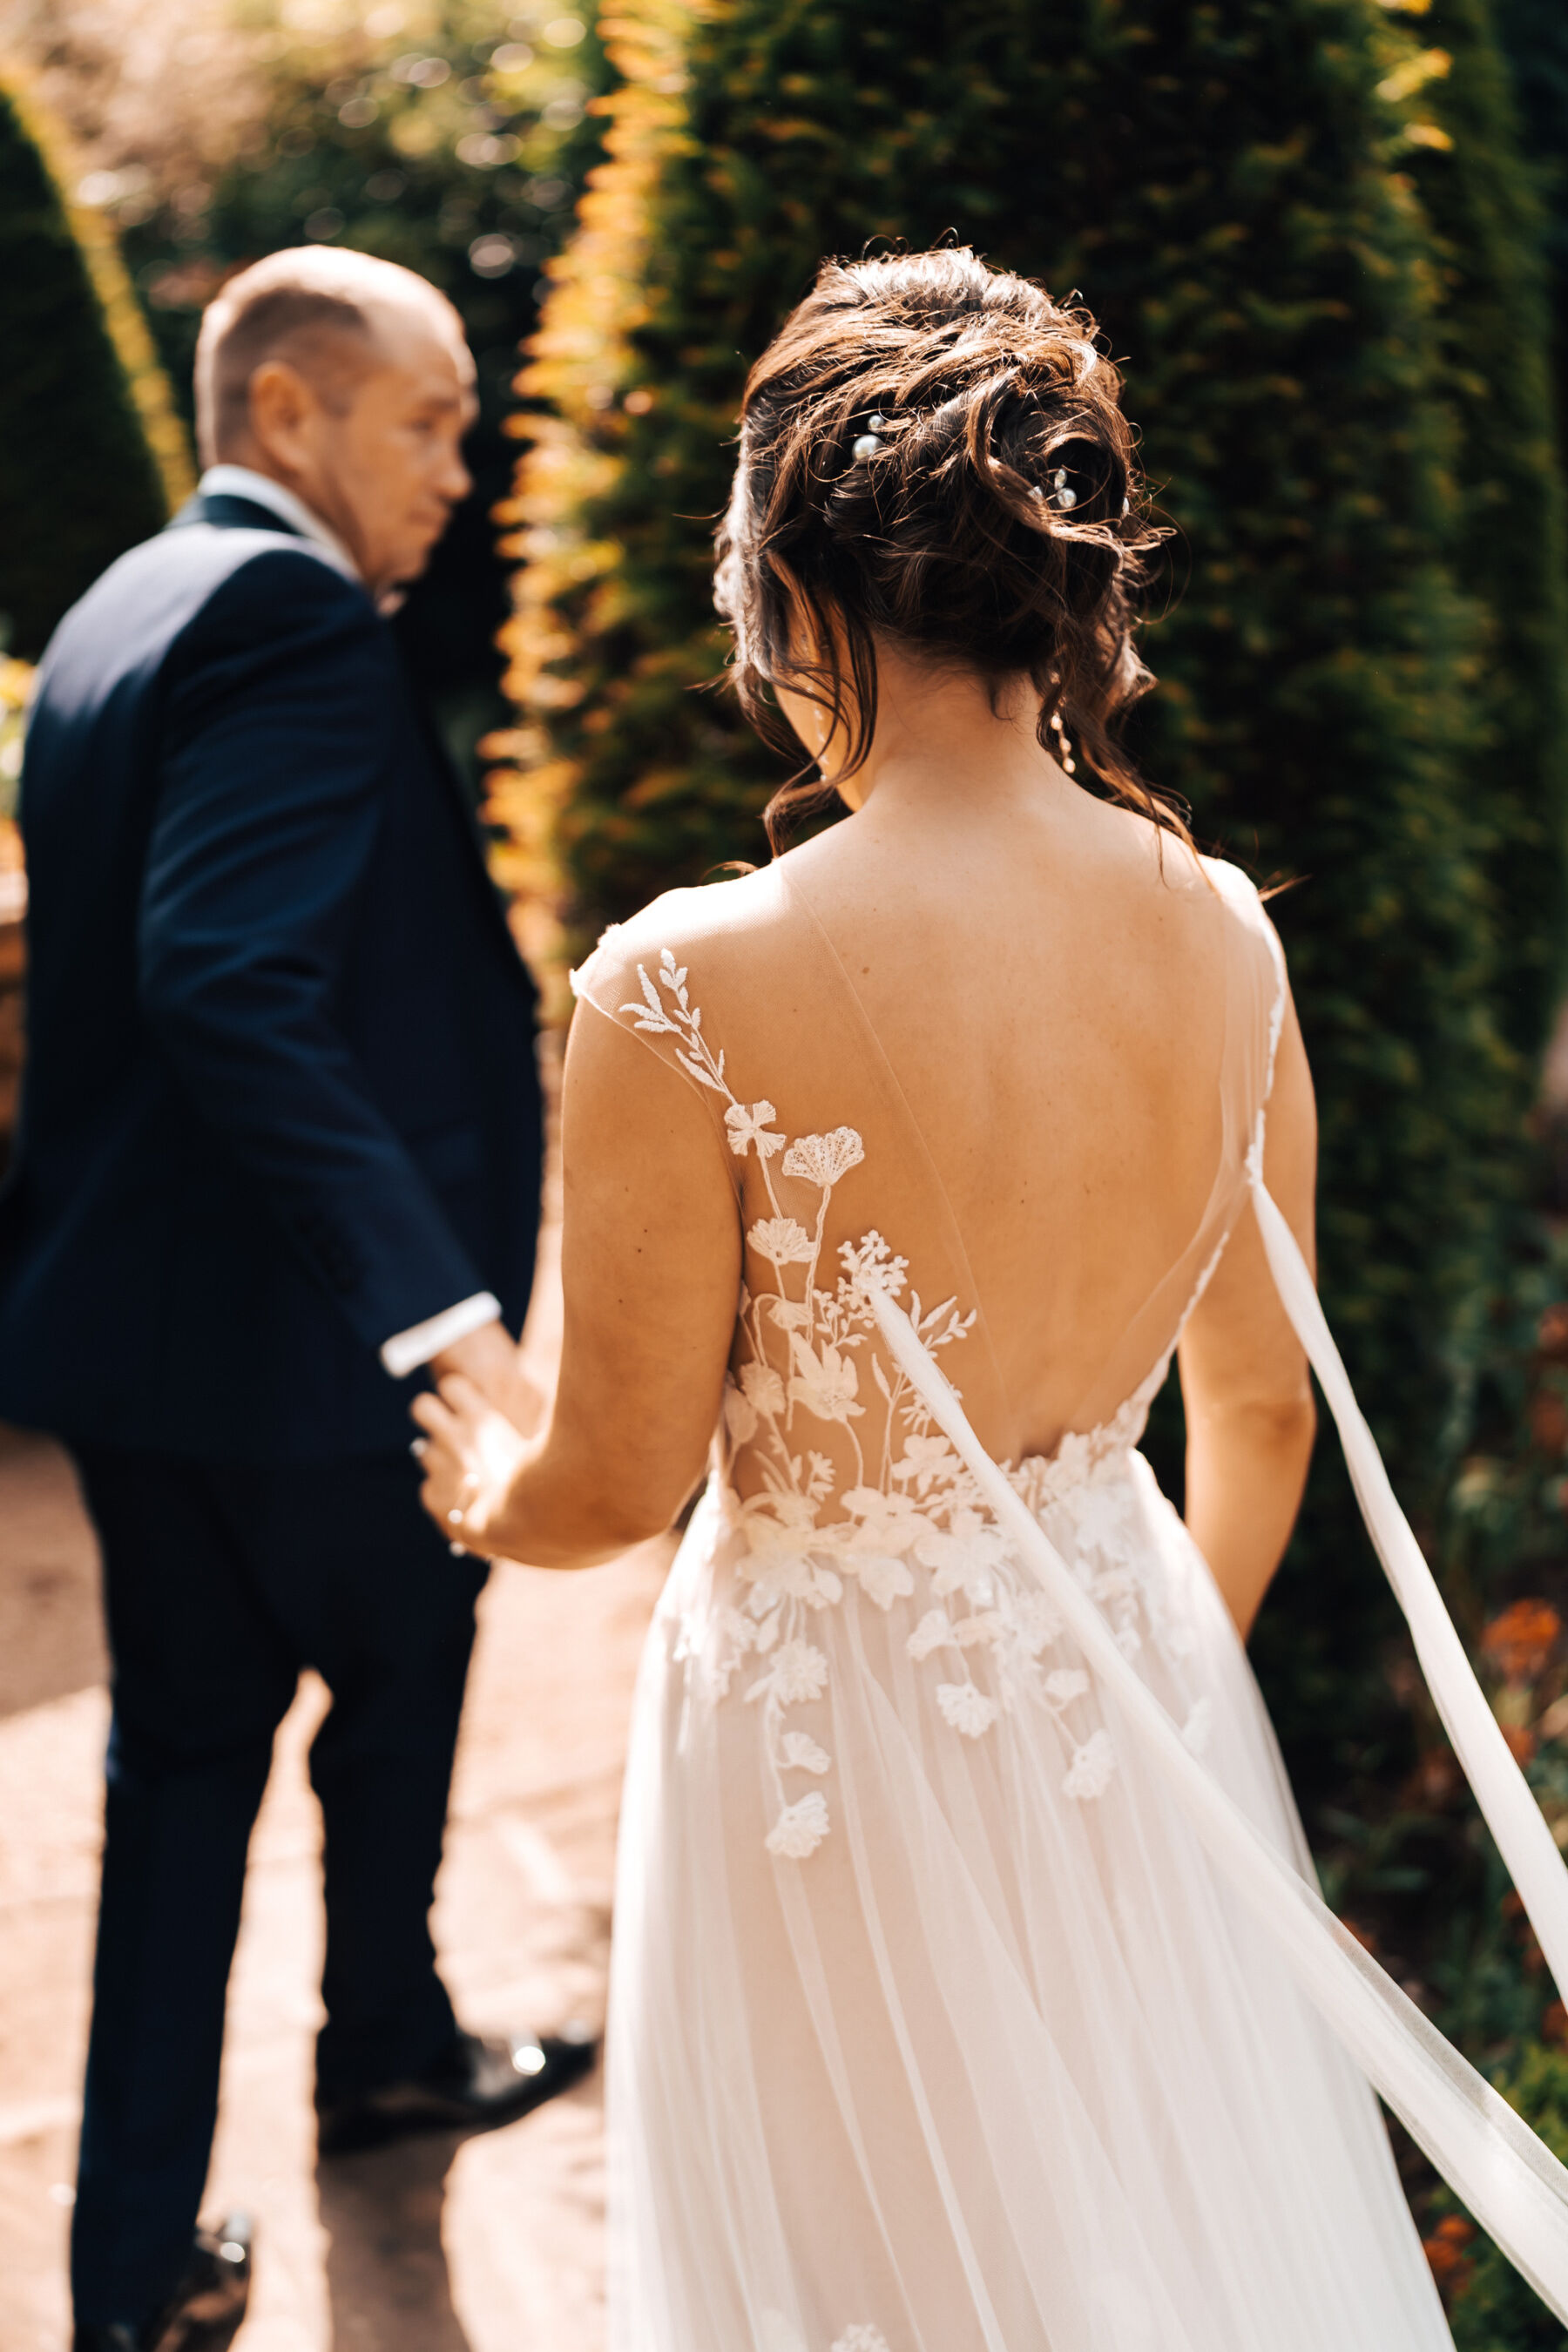 Bride in a backless Anna Kara dress at Tythe Barn wedding venue in the Cotswolds.